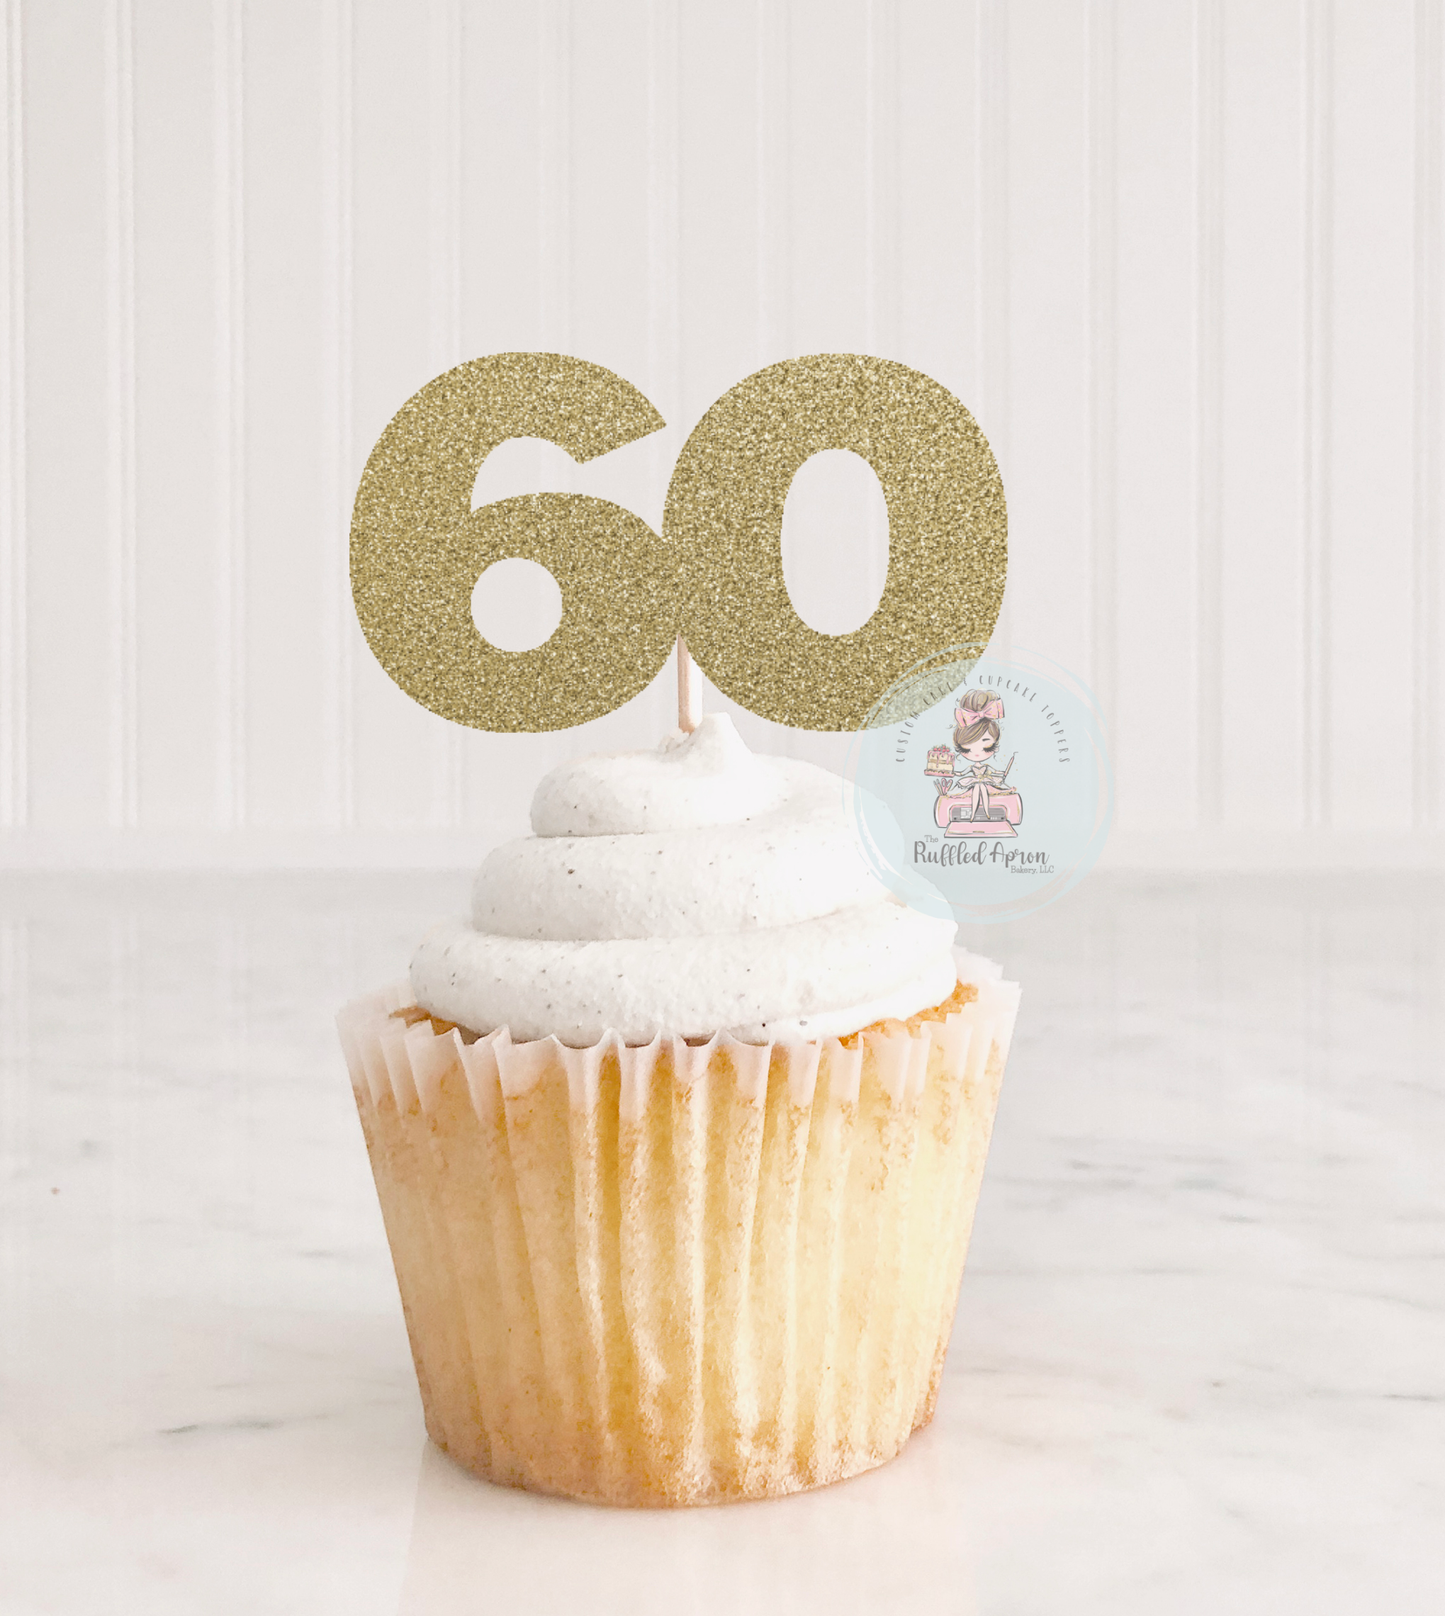 Sixty Cupcake Toppers